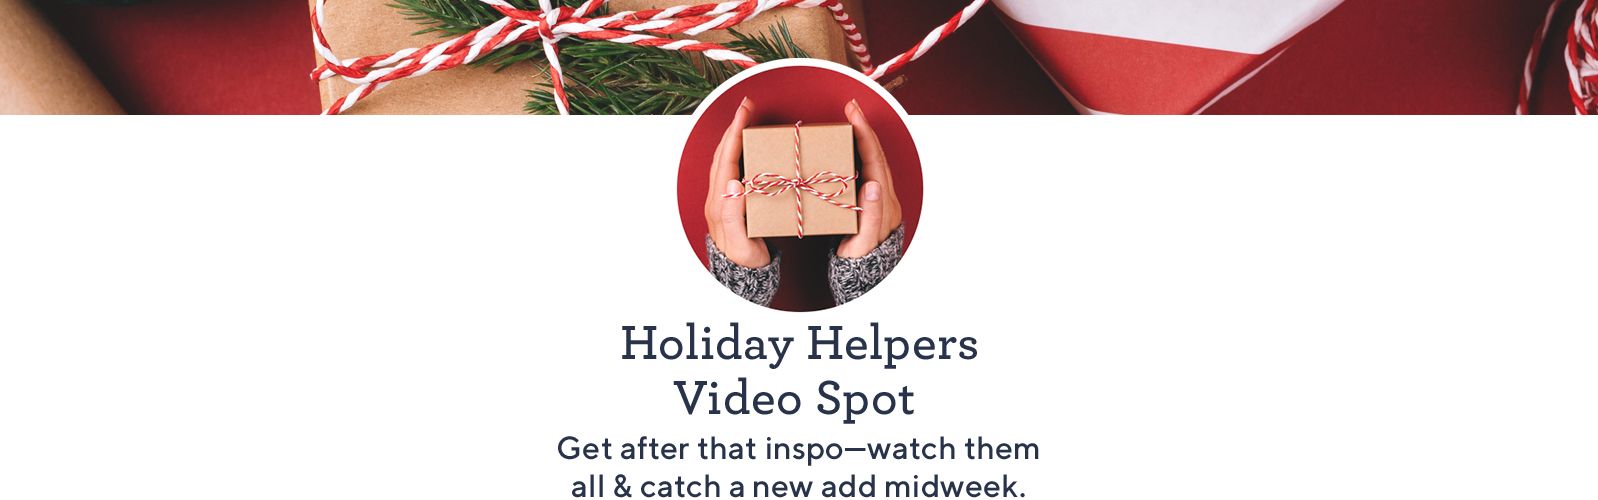 Holiday Helpers Video Spot. Get after that inspo—watch them all & catch a new add midweek.